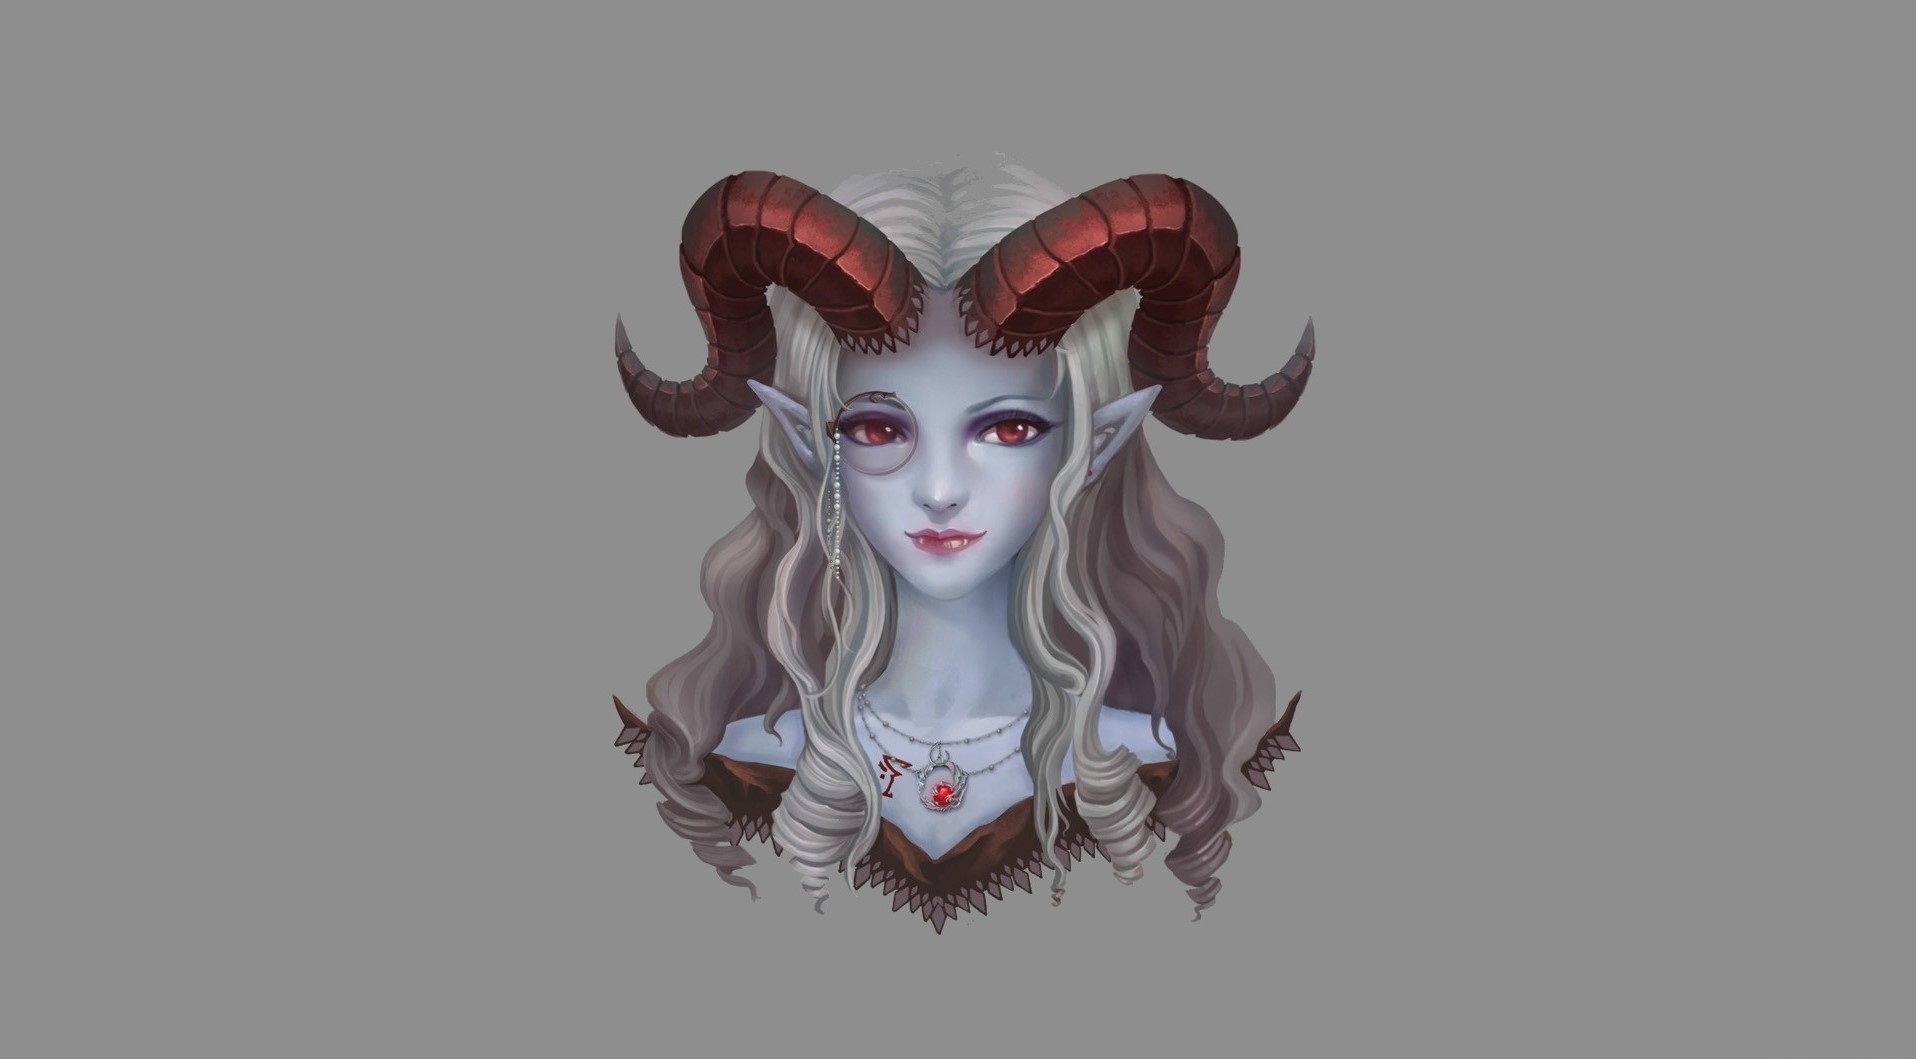 General 1916x1059 horns fantasy art artwork tiefling fantasy girl pointy ears red eyes red lipstick gray background simple background